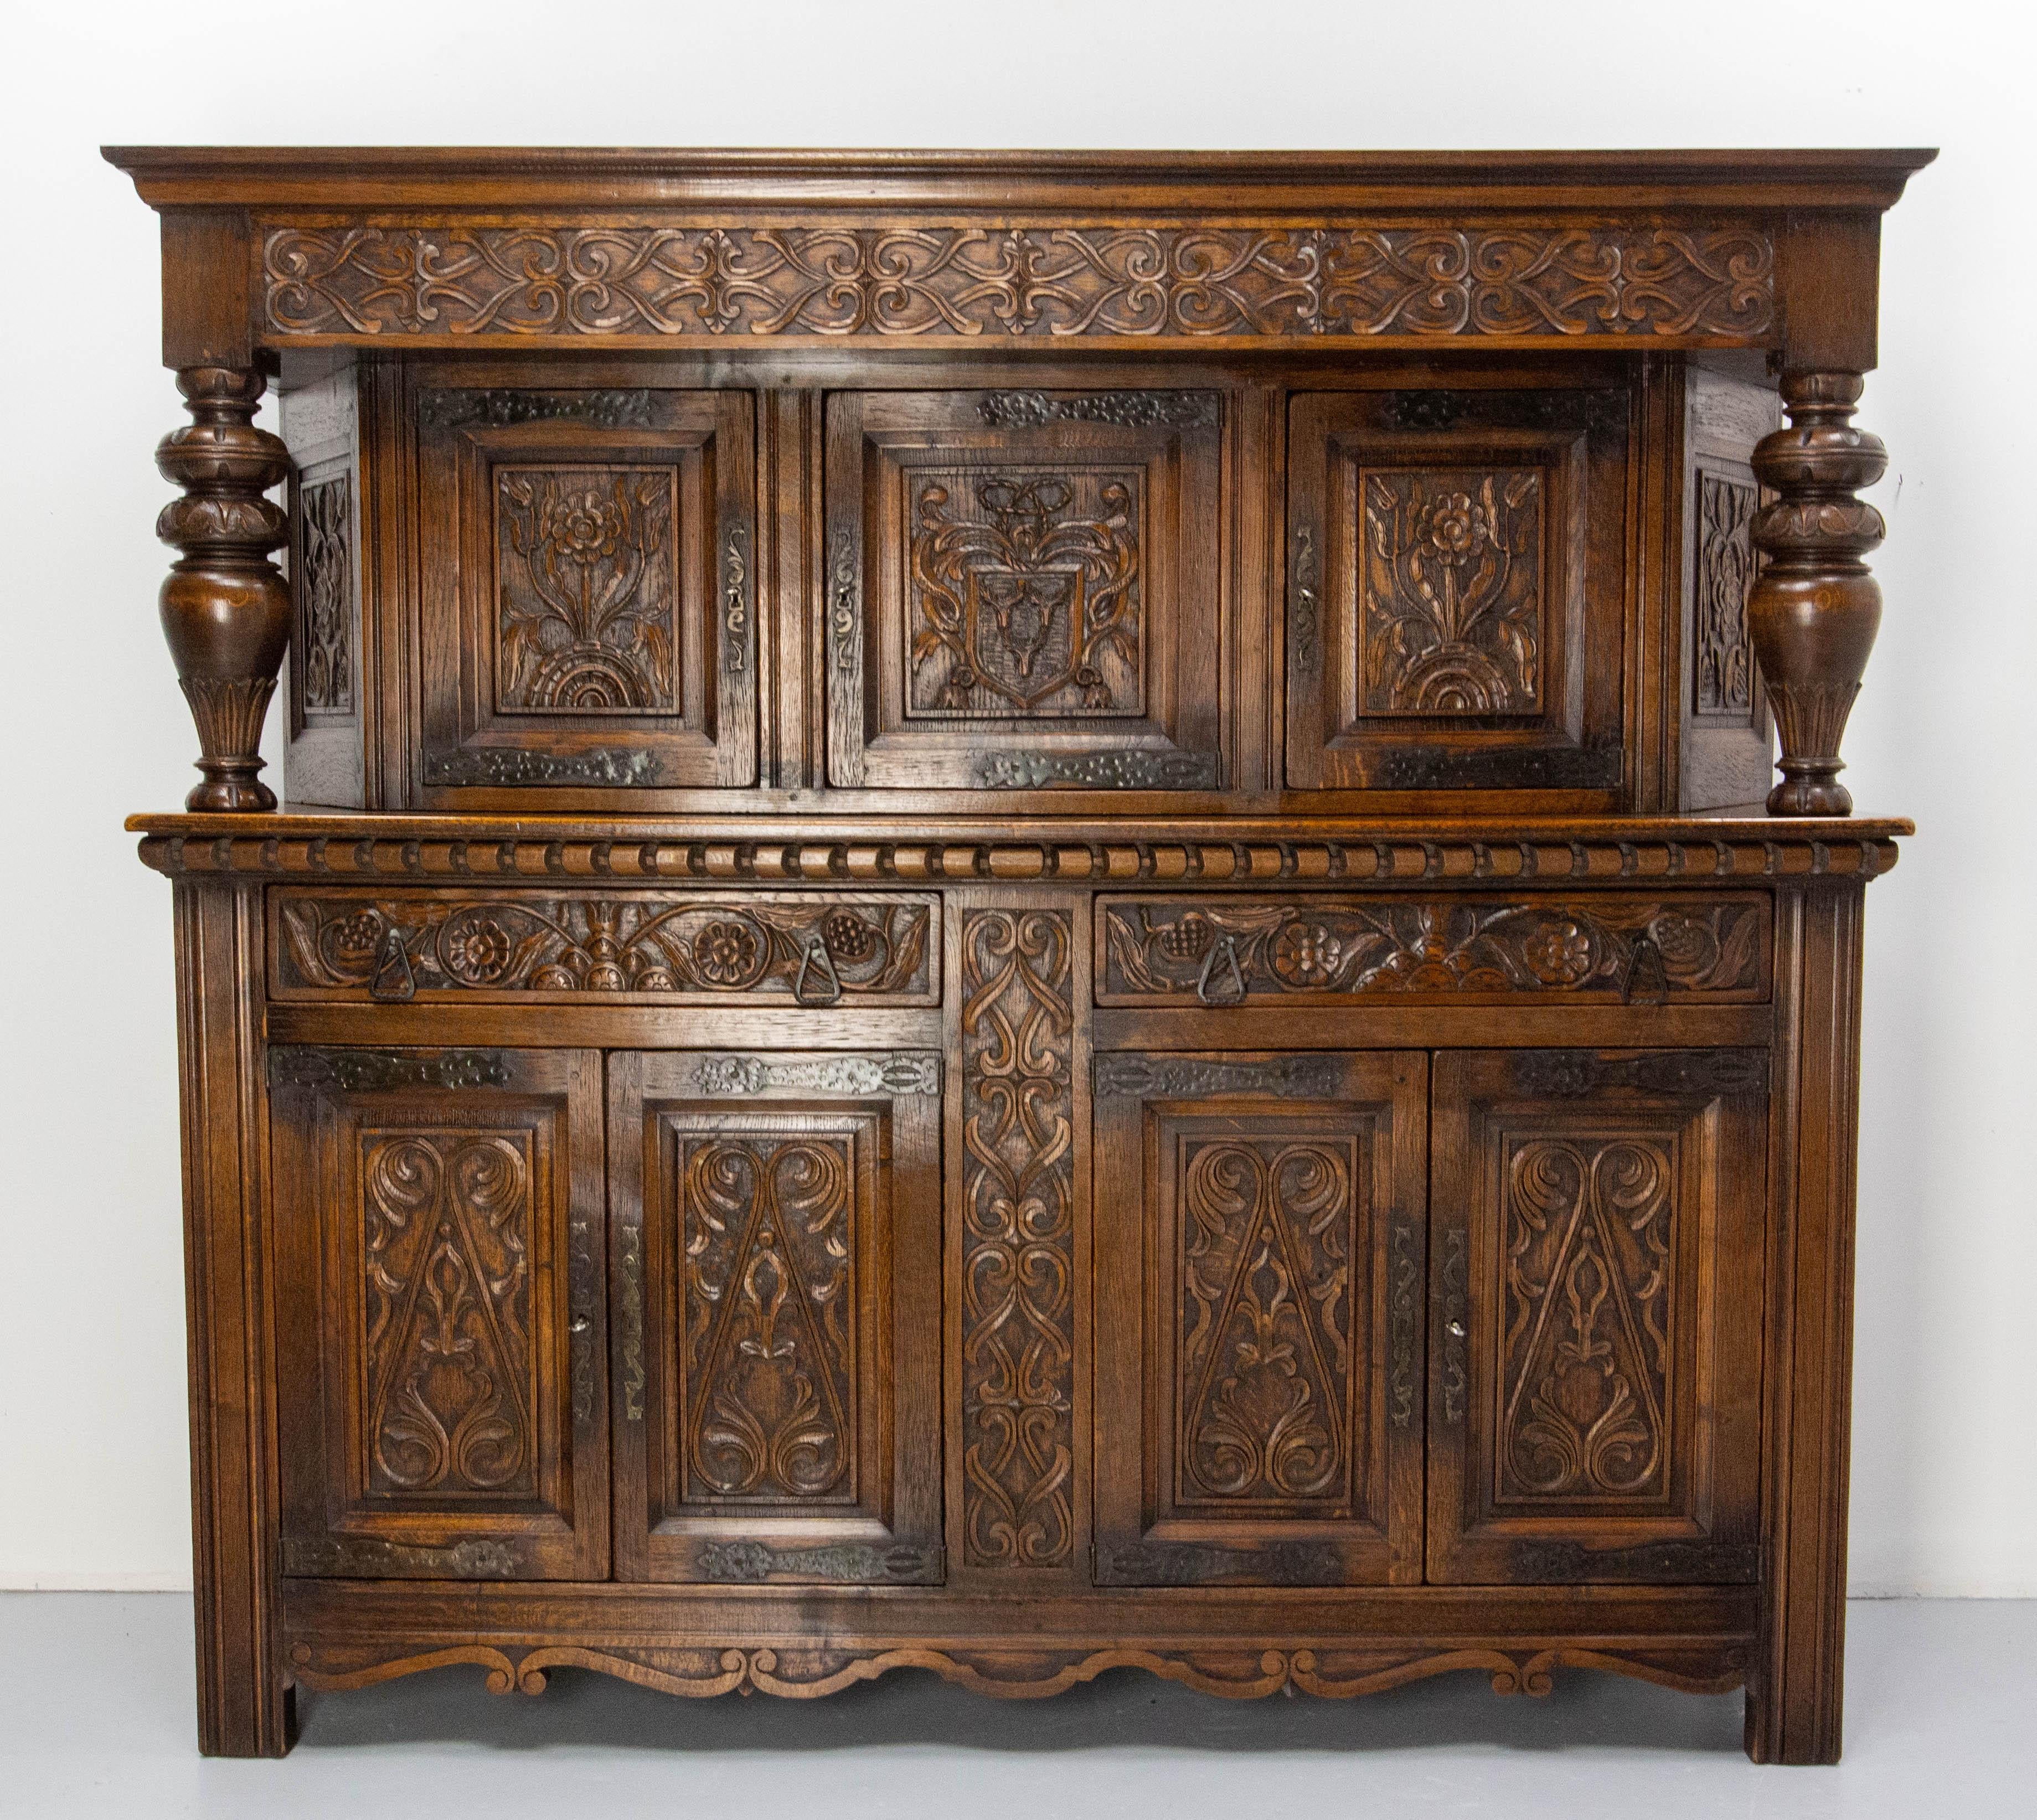 Spanish Renaissance style oak sideboard buffet.
This furniture was made in the 1960's and totally hand-carved. 
On the upper part the central panel represents a coat of arms with three deer heads. The rest of the furniture is decorated with